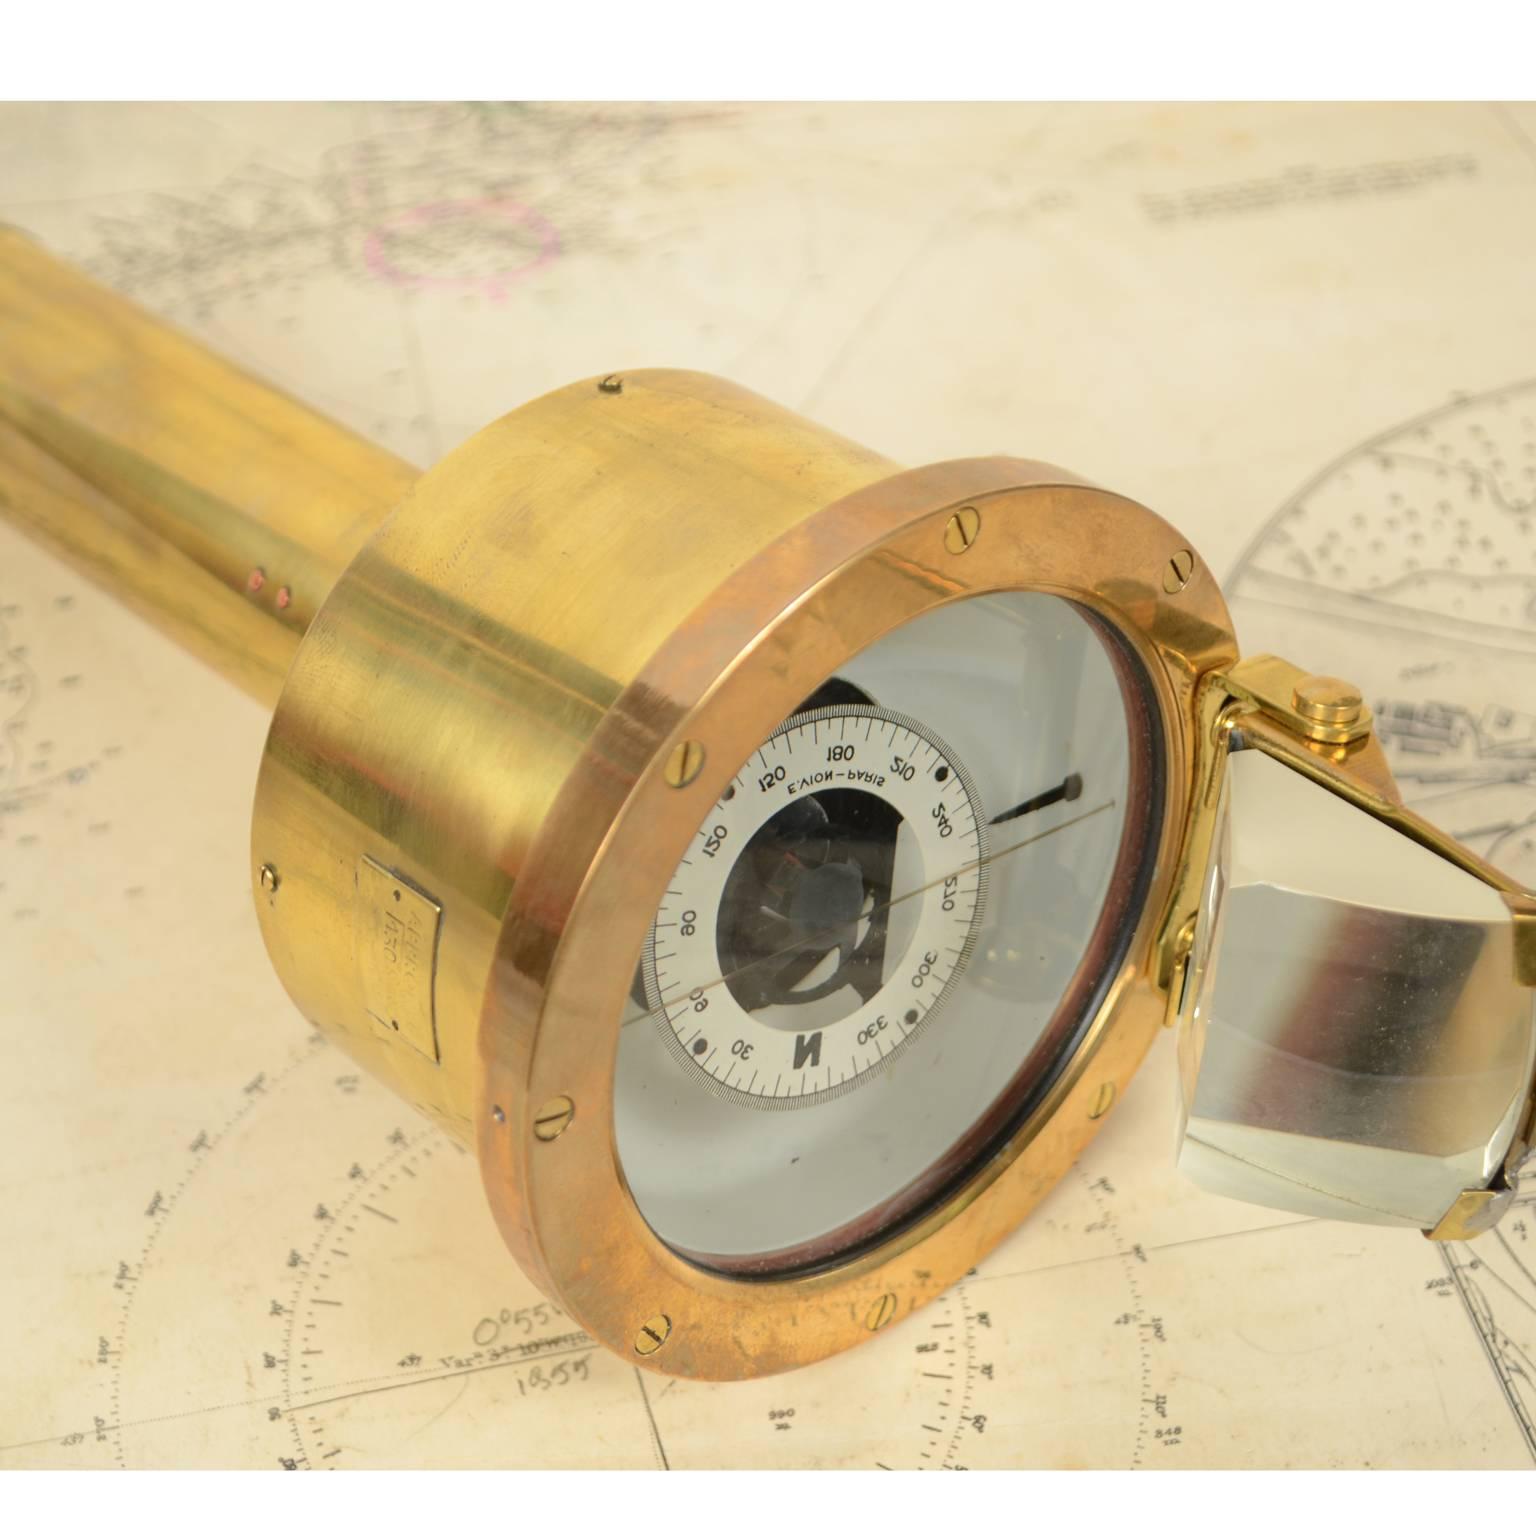 Nautical Brass Magnetic Compass with Original Box by E. Vion Paris, Early 1900 For Sale 6